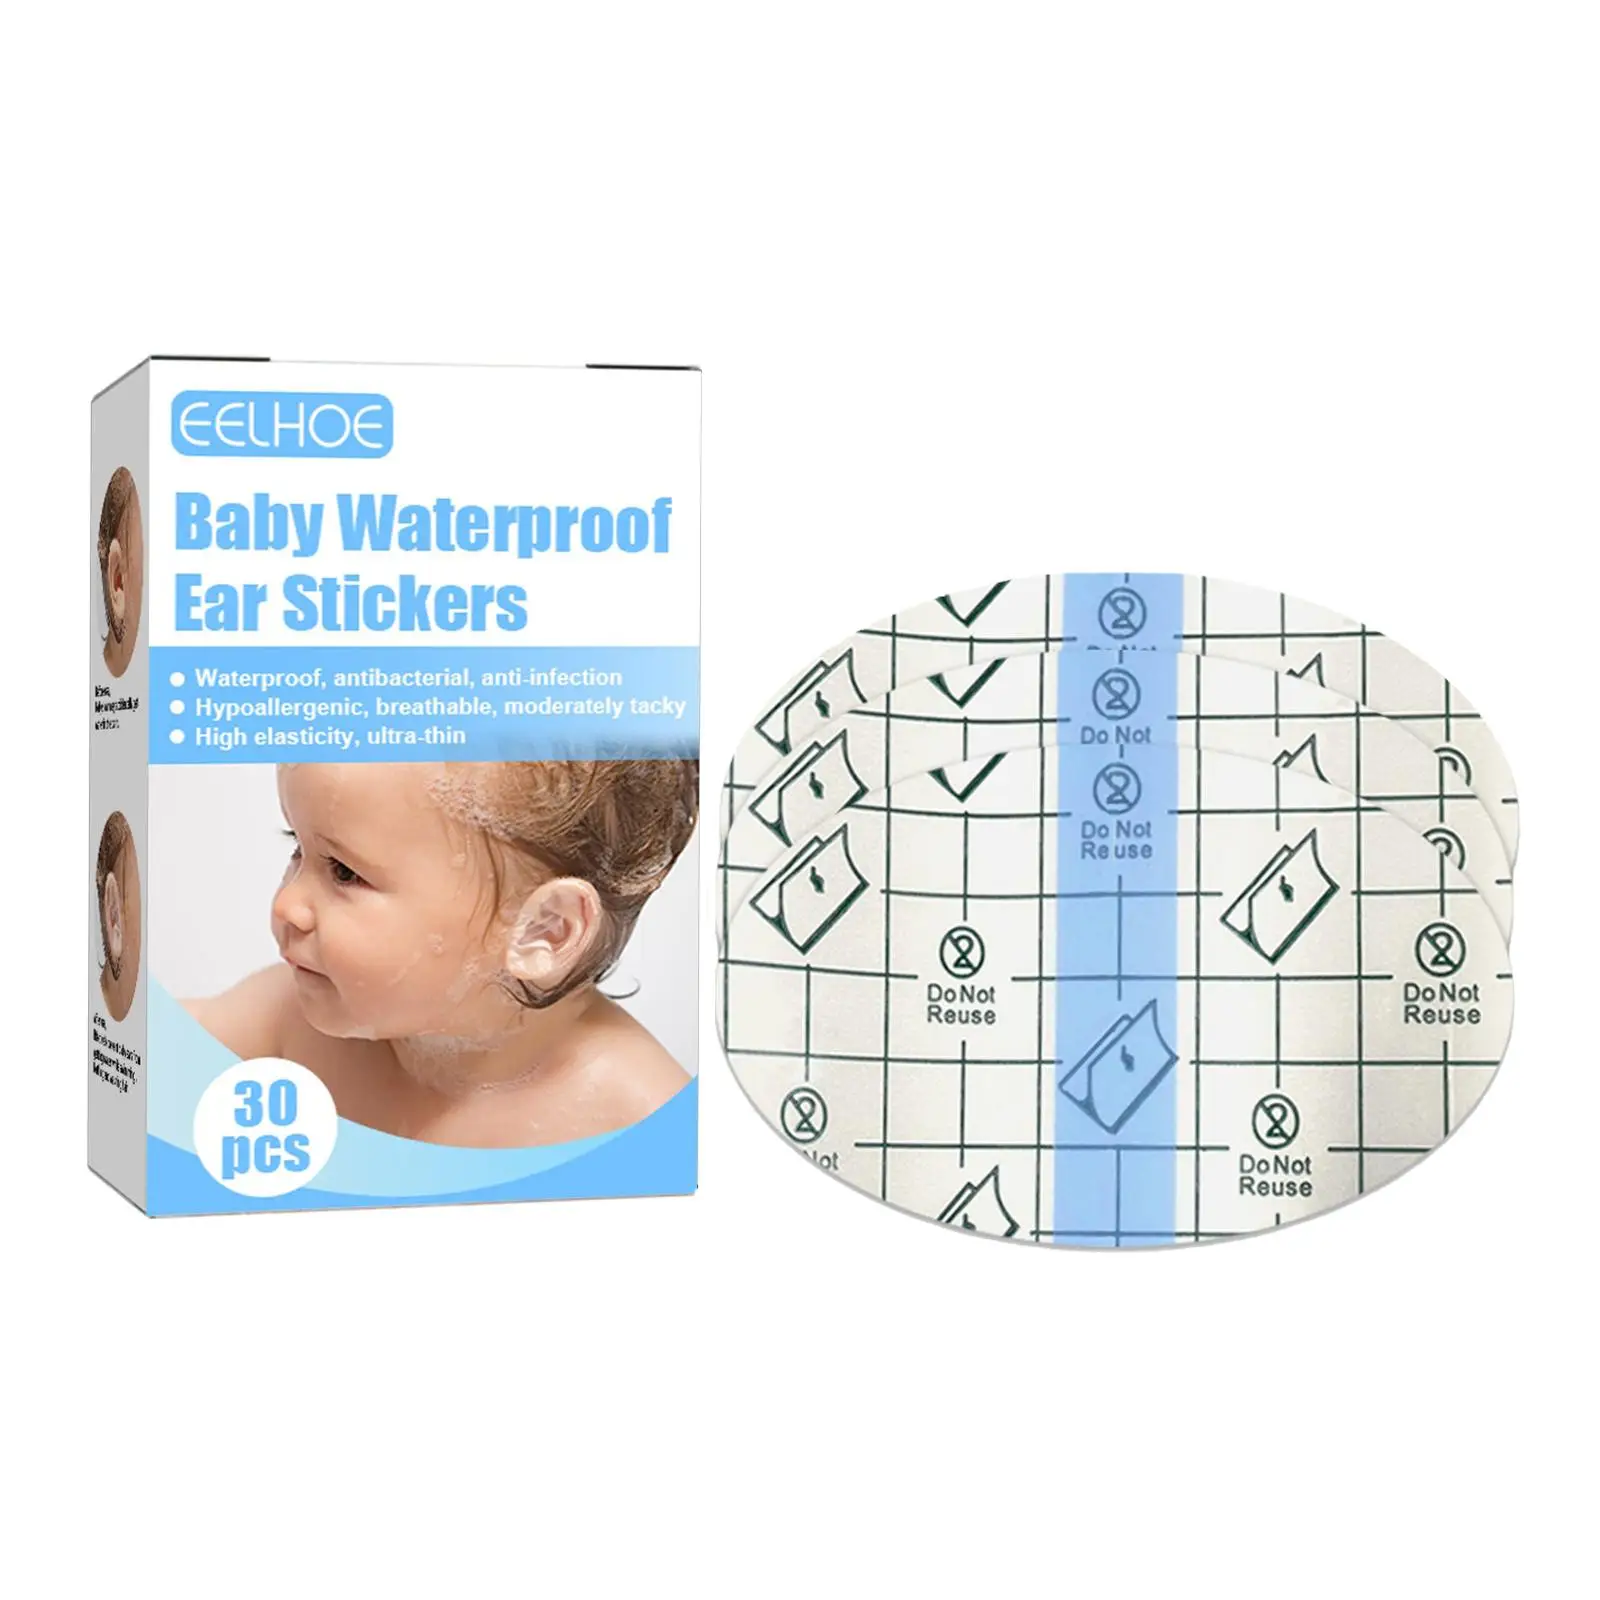 30 Pieces Baby Waterproof Ear Stickers Portable for Water Sports Newborn Ear Protection